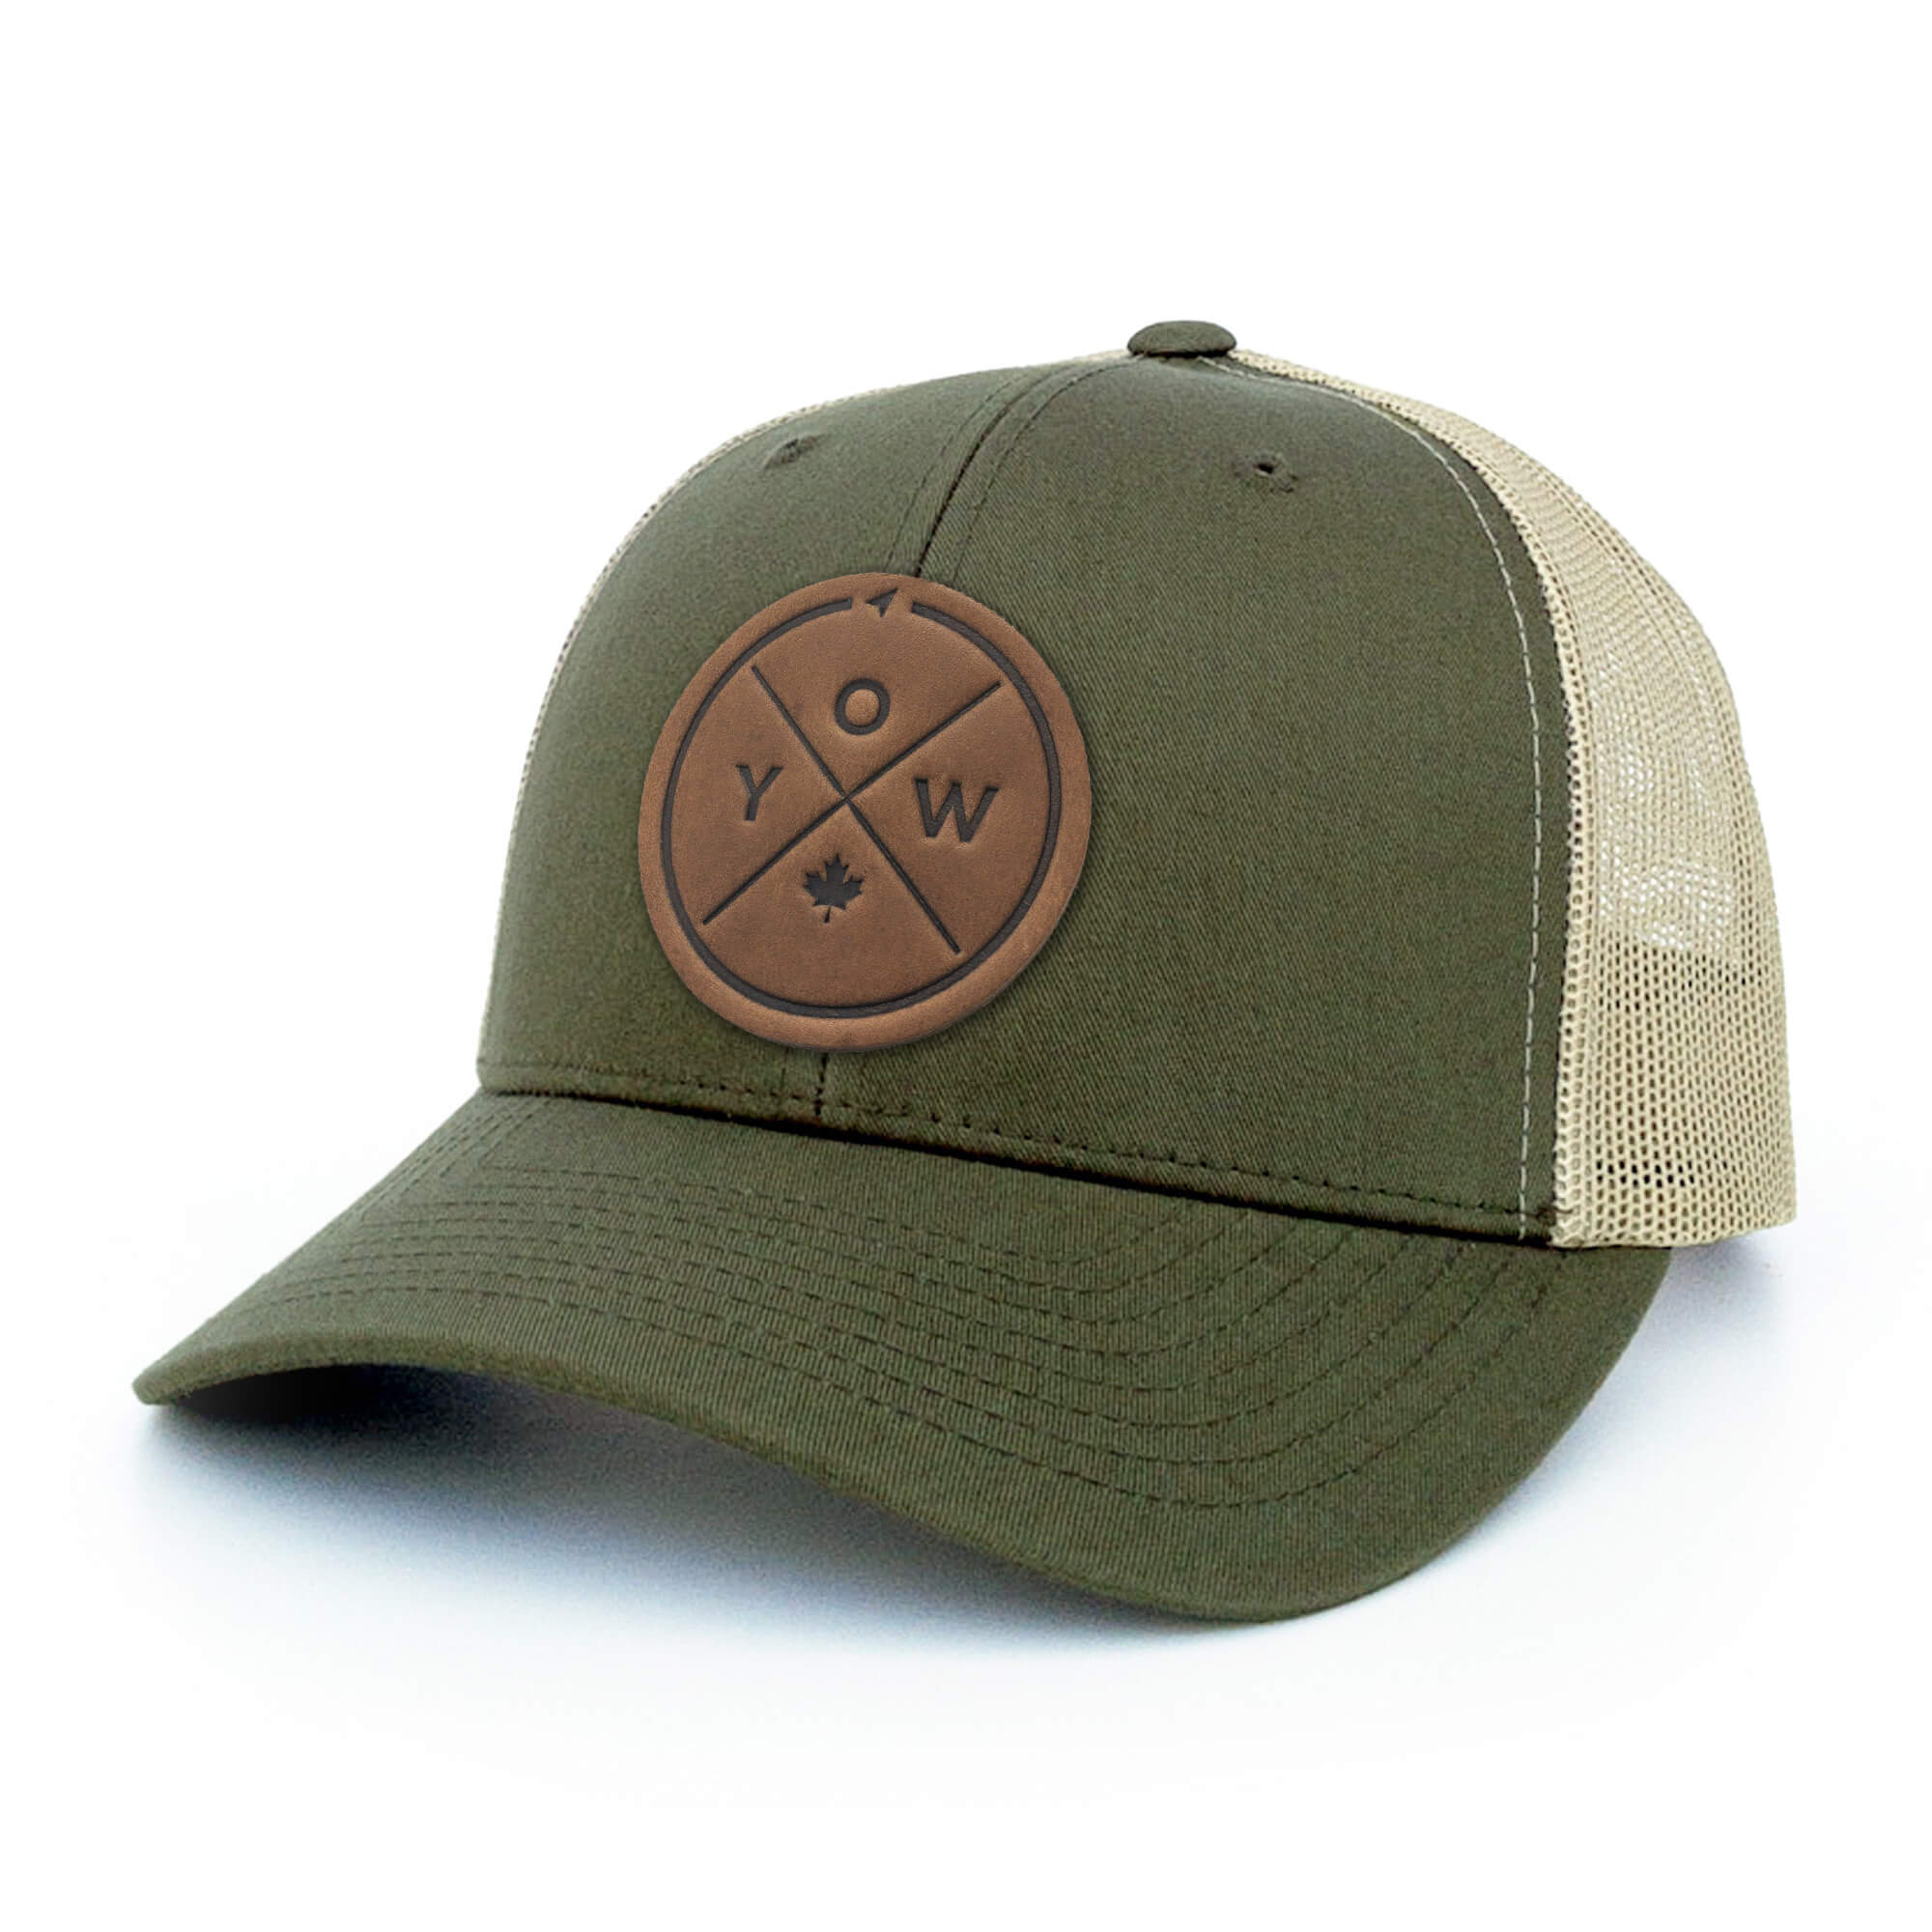 Moss Green and khaki trucker hat with full-grain leather patch with YOW embossing | BLACK-002-008, CHARC-002-008, NAVY-002-008, HGREY-002-008, MOSS-002-008, BROWN-002-008